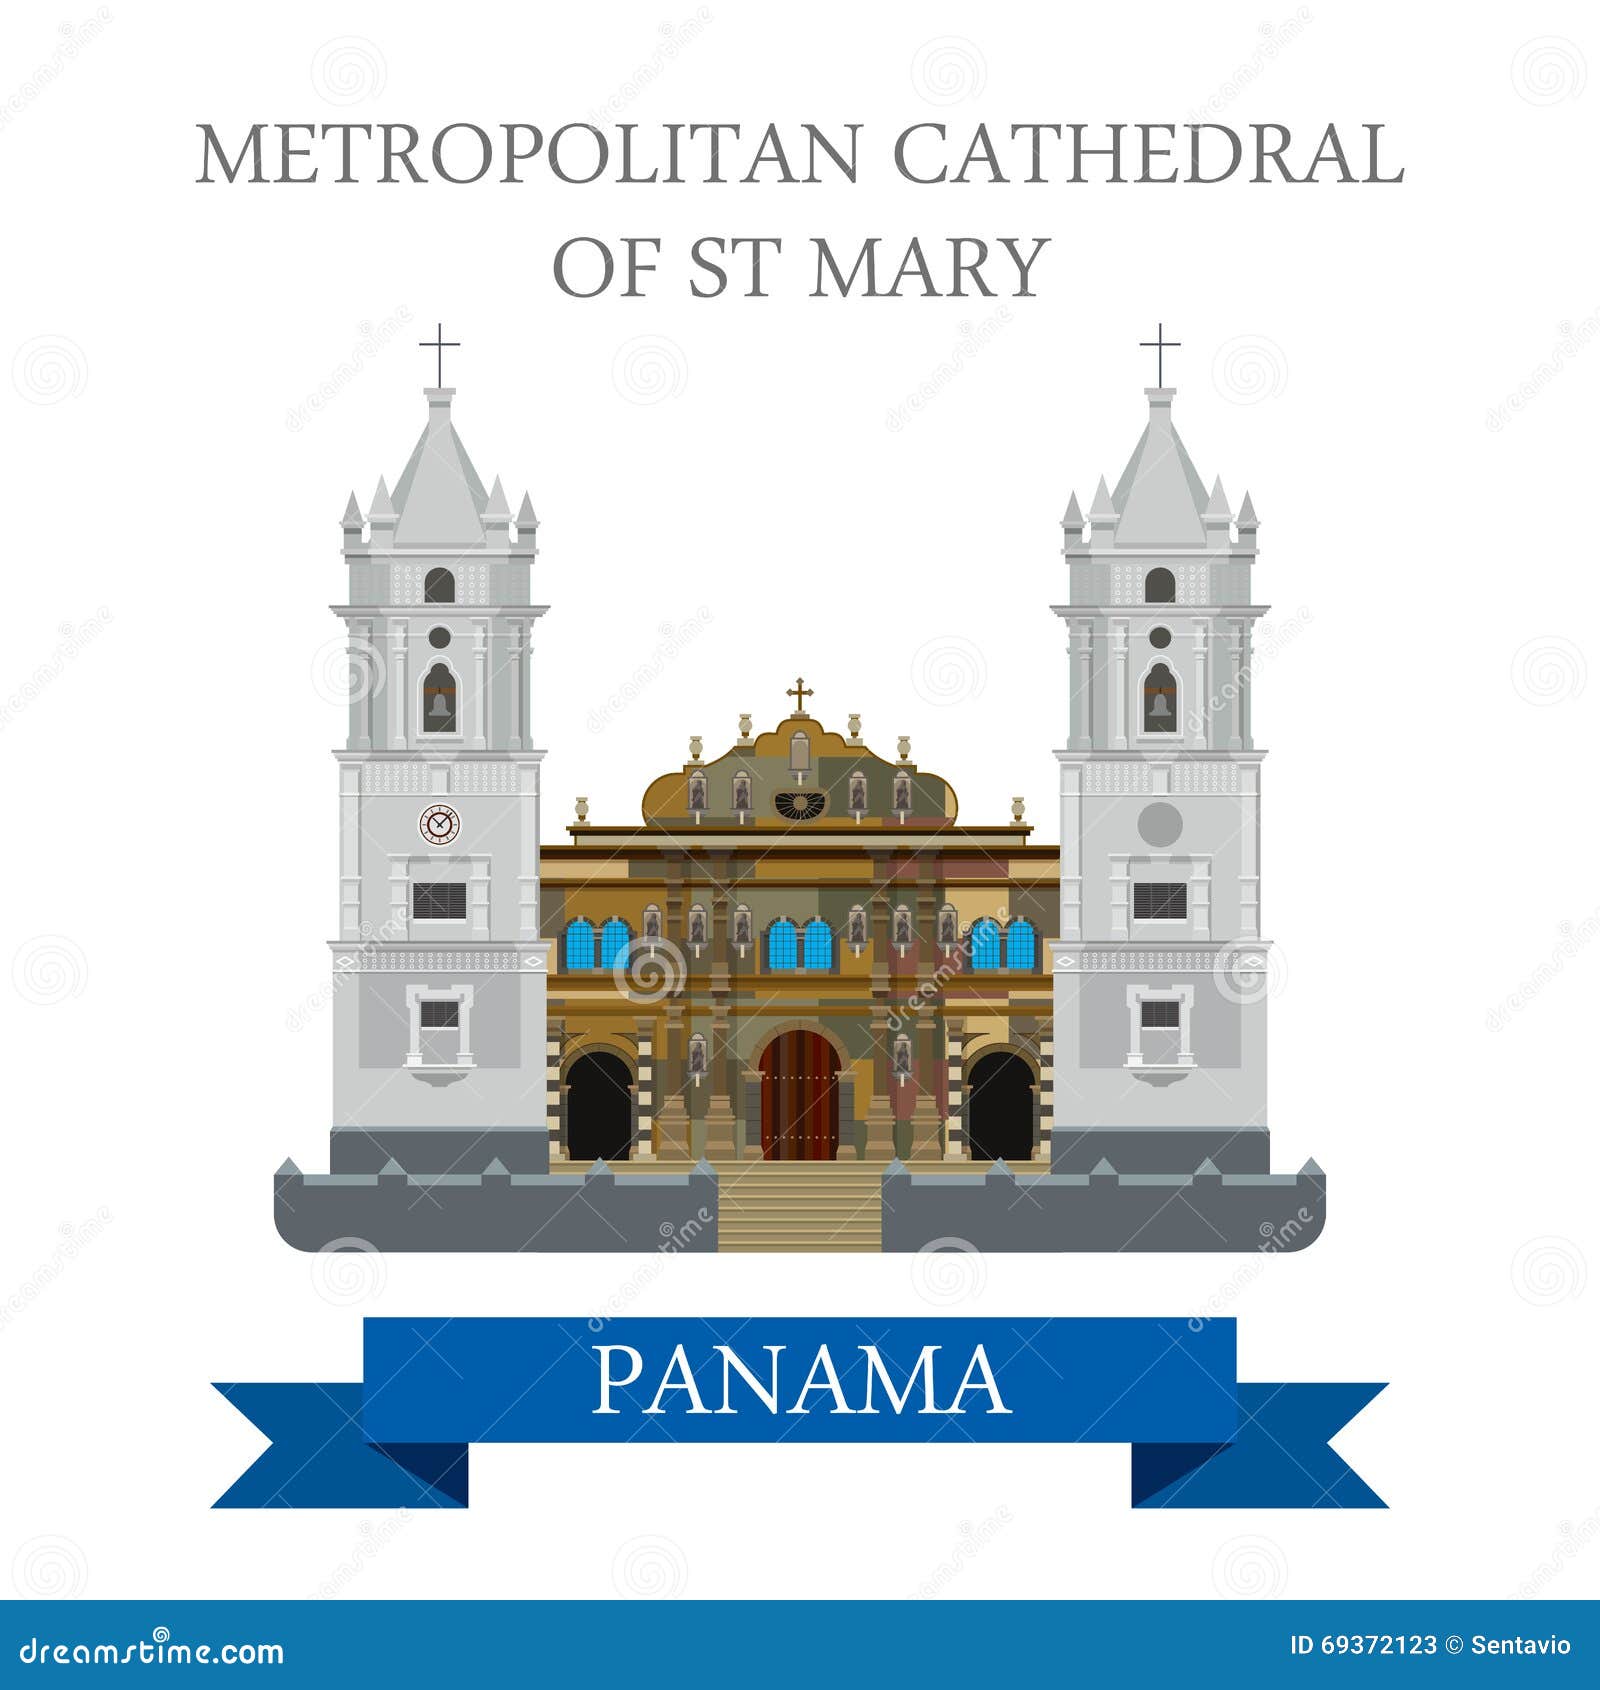 metropolitan cathedral of st mary panama  flat attraction